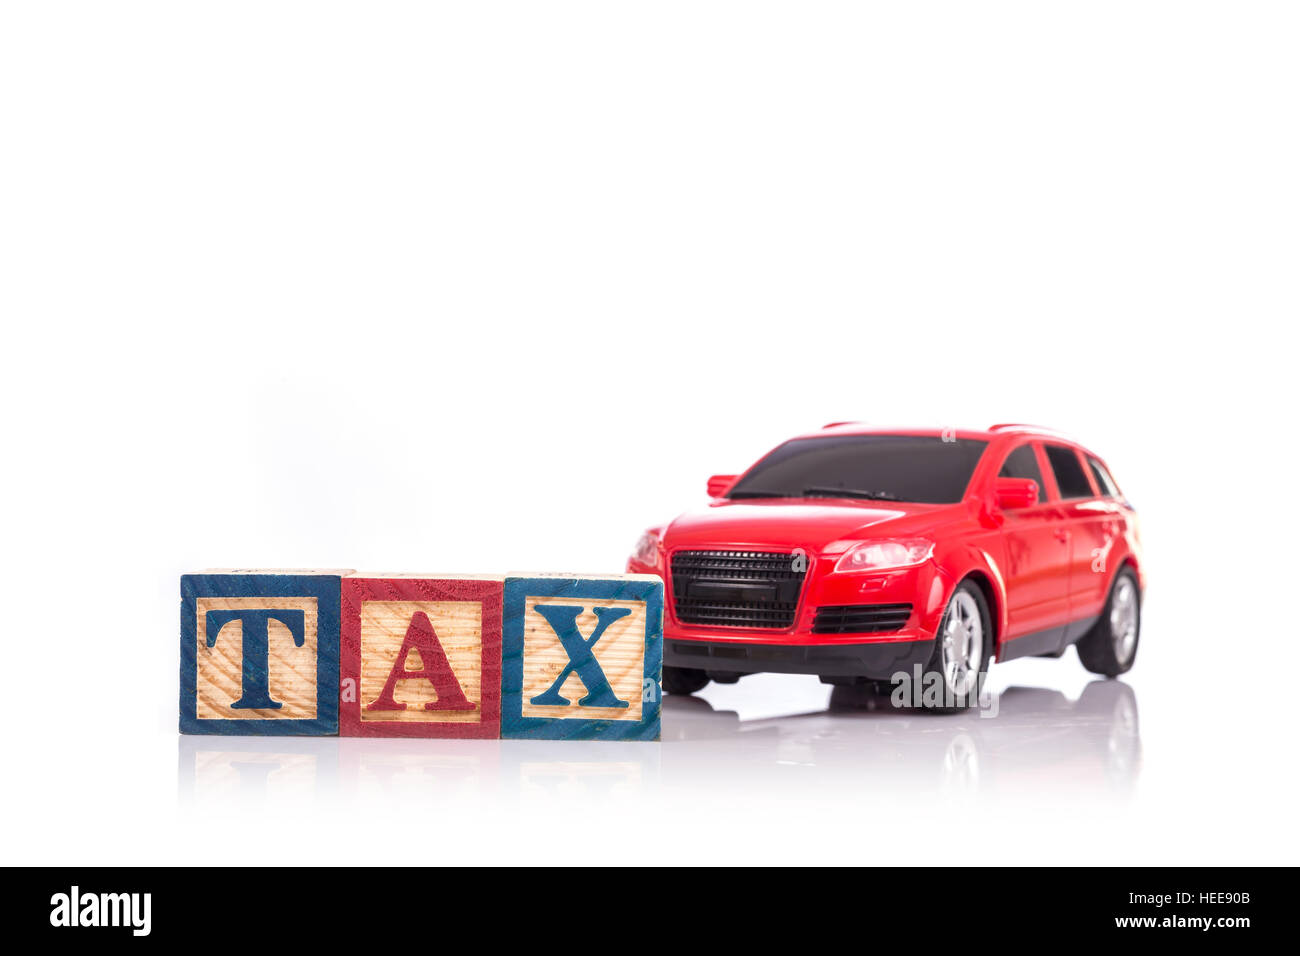 TAX write in colorful wood alphabet blocks and red model car isolated on white background Stock Photo